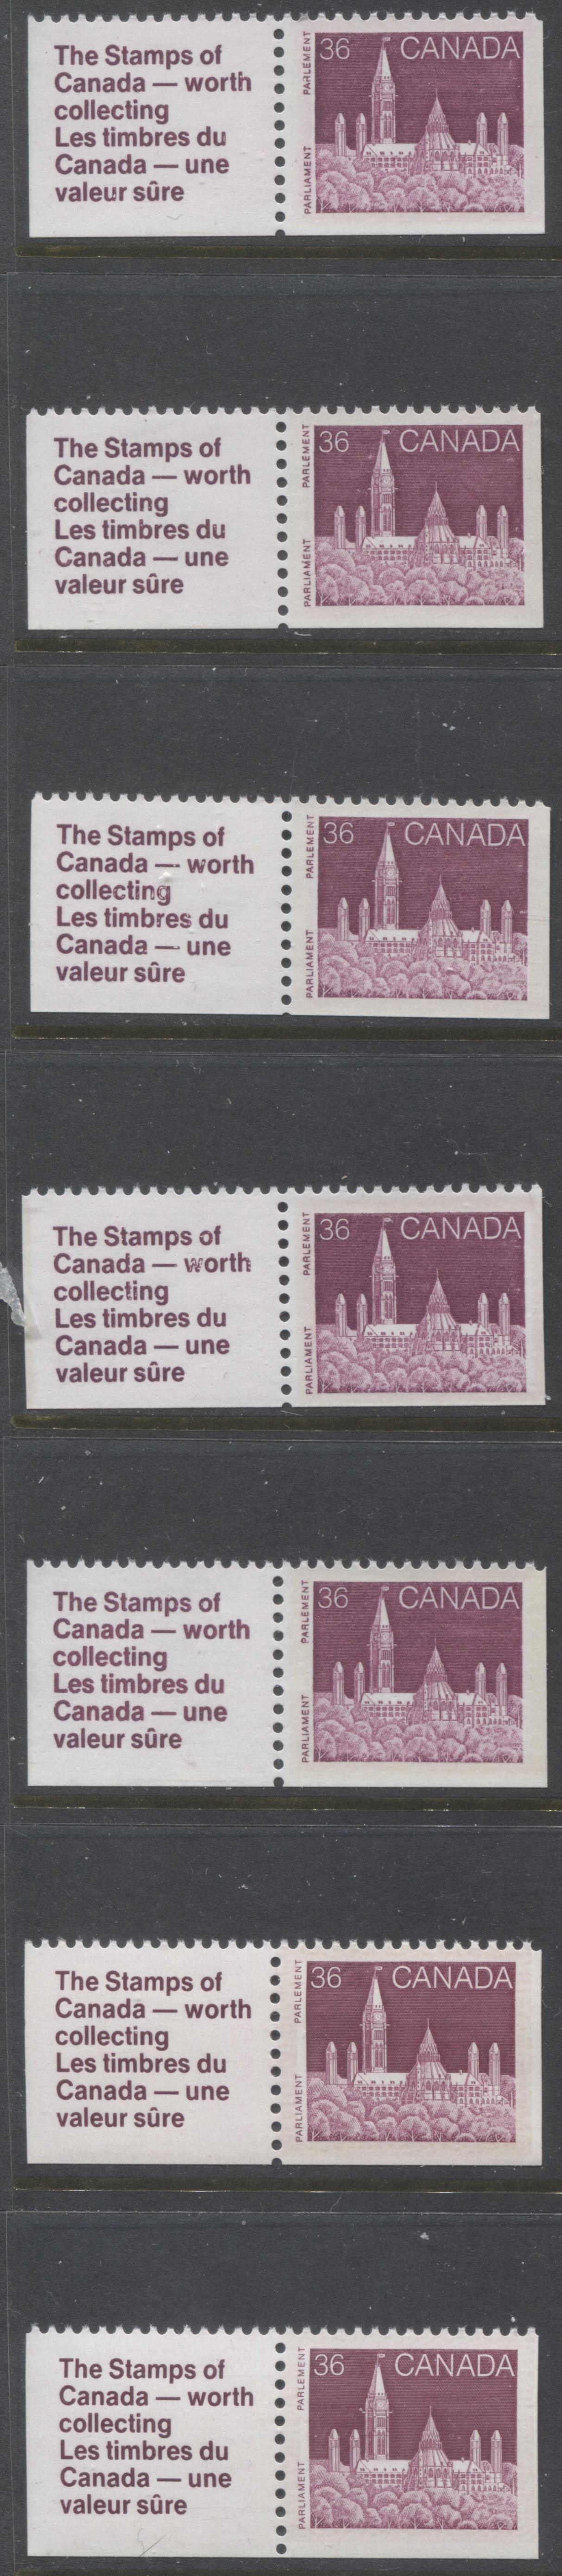 Lot 387 Canada #948-iii 36c Lilac Rose Parliament Buildings, 1982-1987 Artifacts & National Parks Issue, 7 VFNH Booklet Stamp Label Pairs, NF/NF to HF/HF, Rolland & Harrison Papers